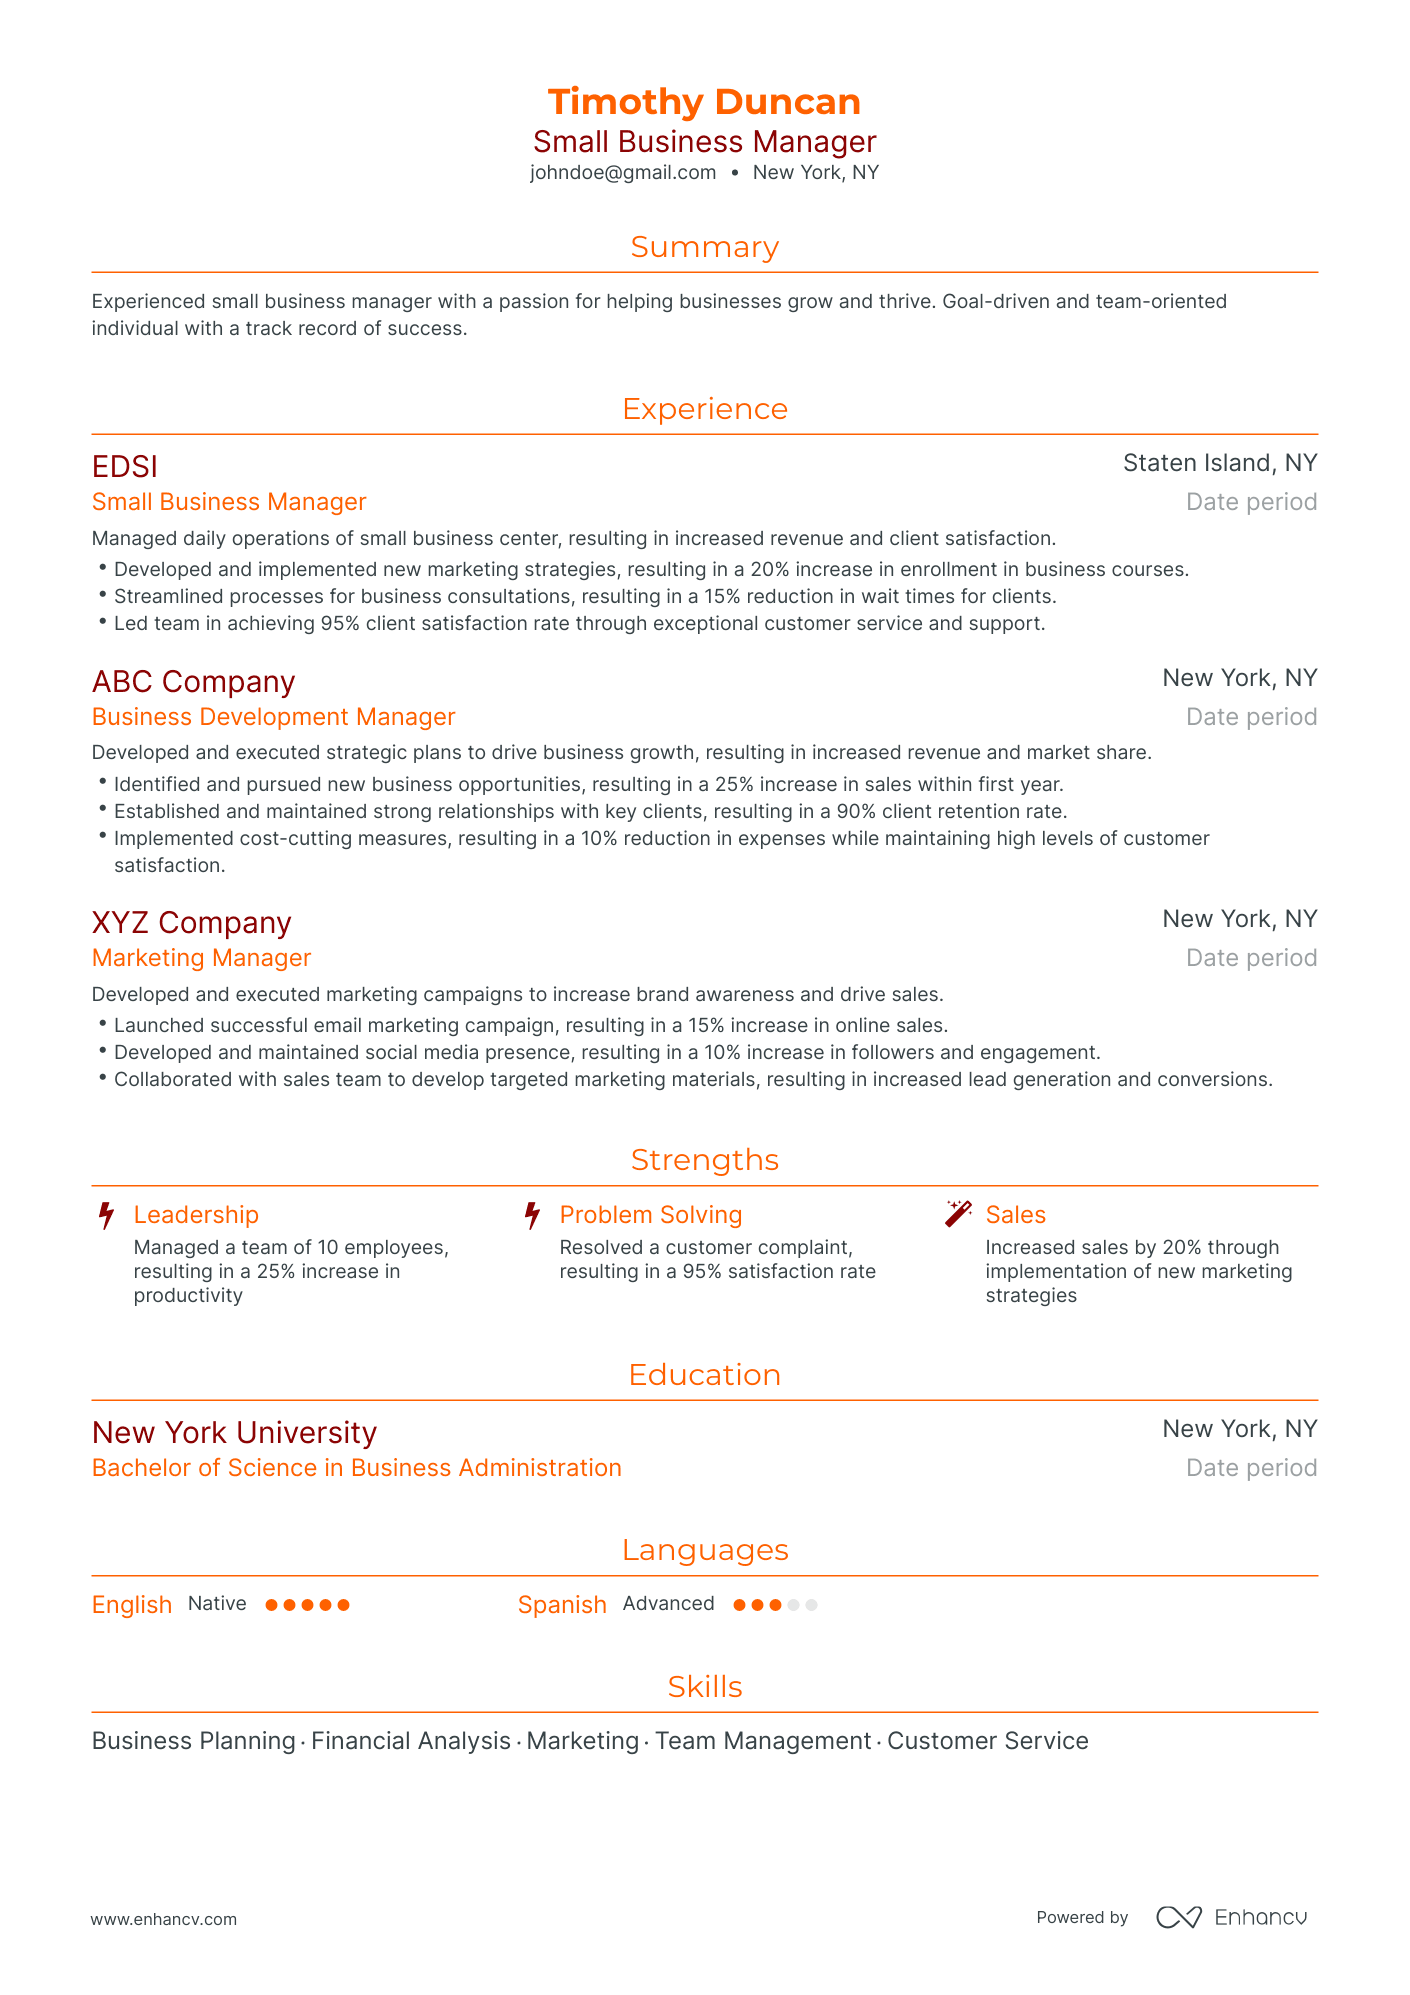 Traditional Small Business Manager Resume Template